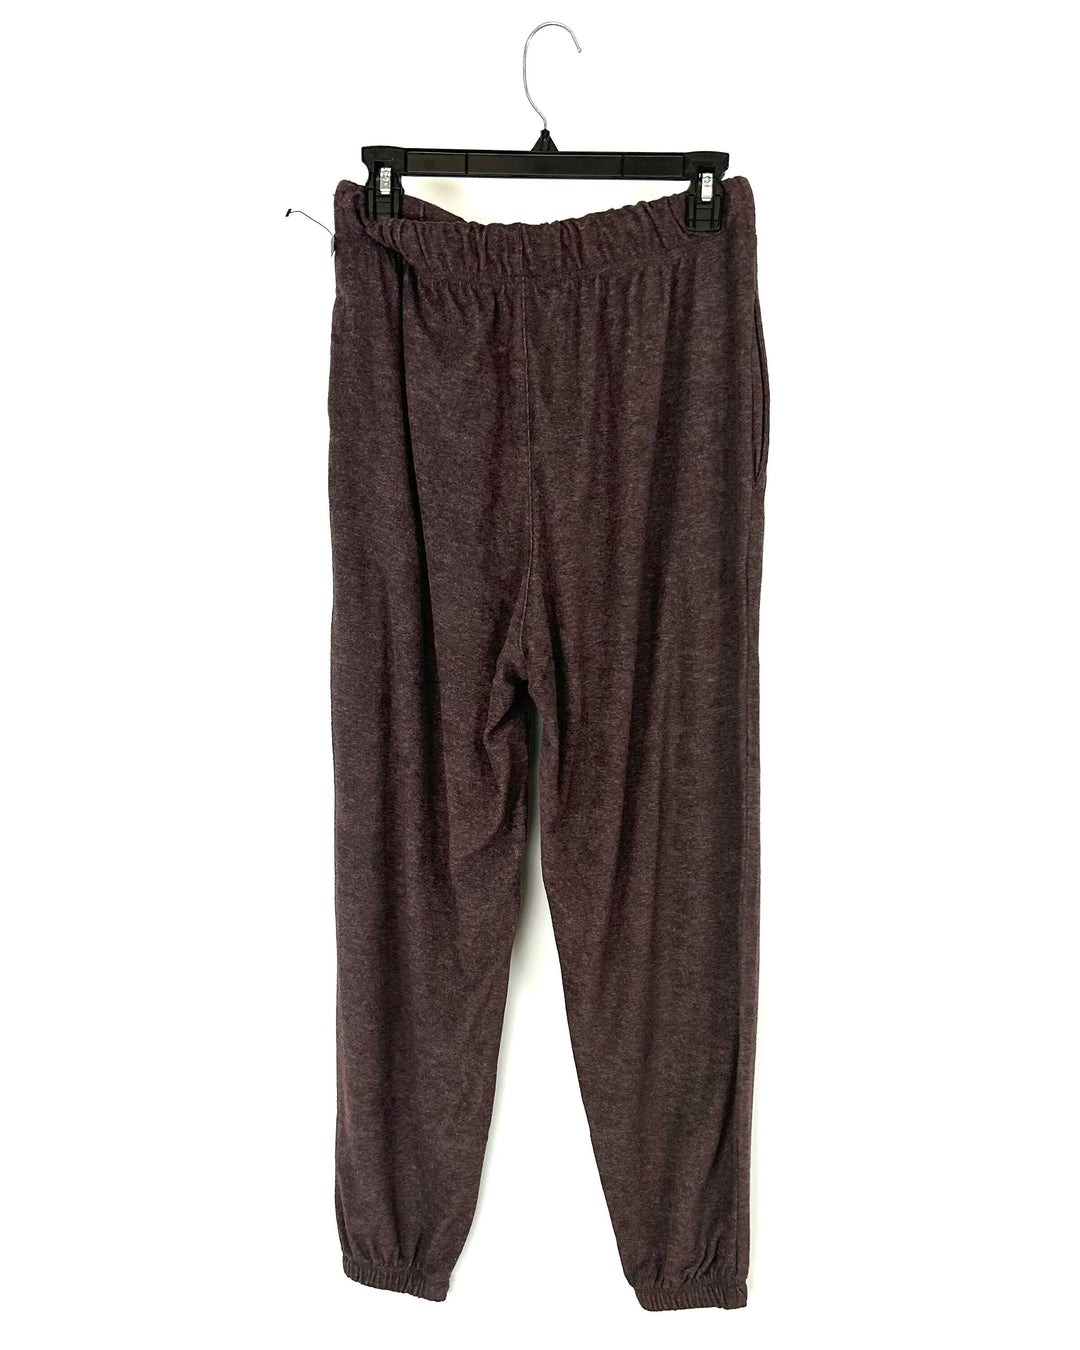 Brown Terry Cloth Joggers - Size 8-10